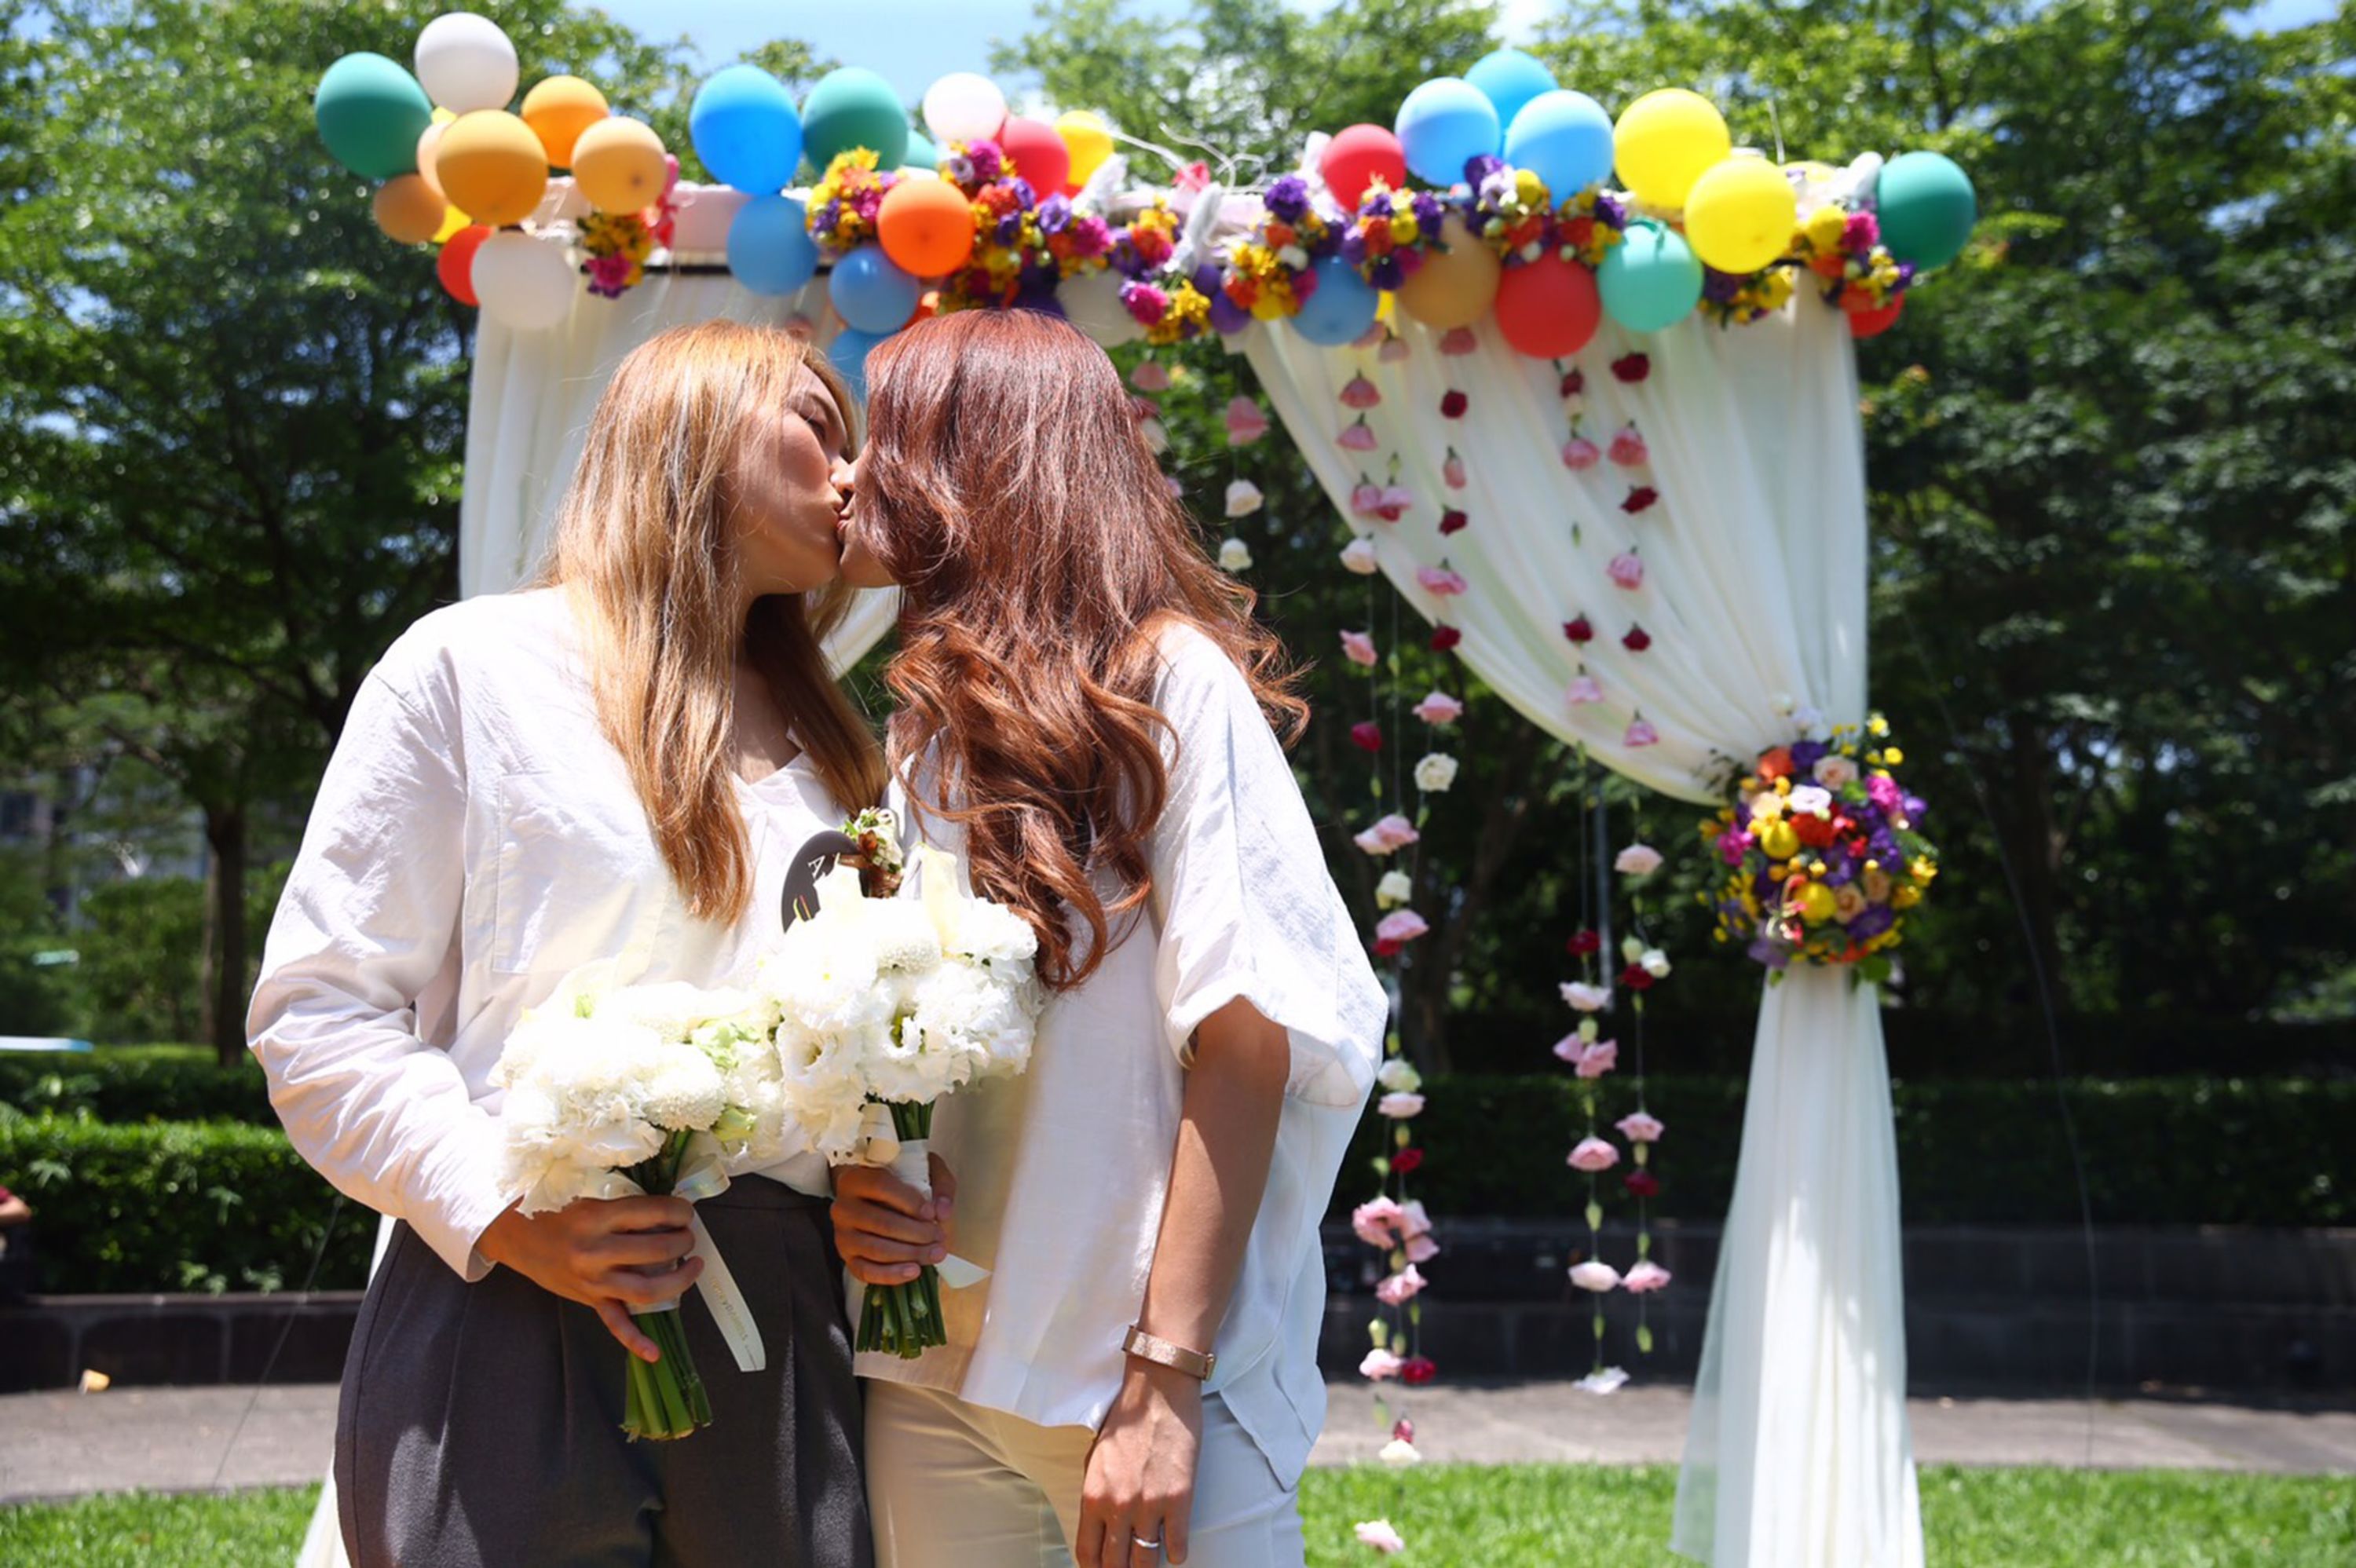 Amber Wang, left, and Kristin Huang, right, kiss during their wedding just days after Taiwan passed historical same-sex marriage law, making it the first nation in Asia.